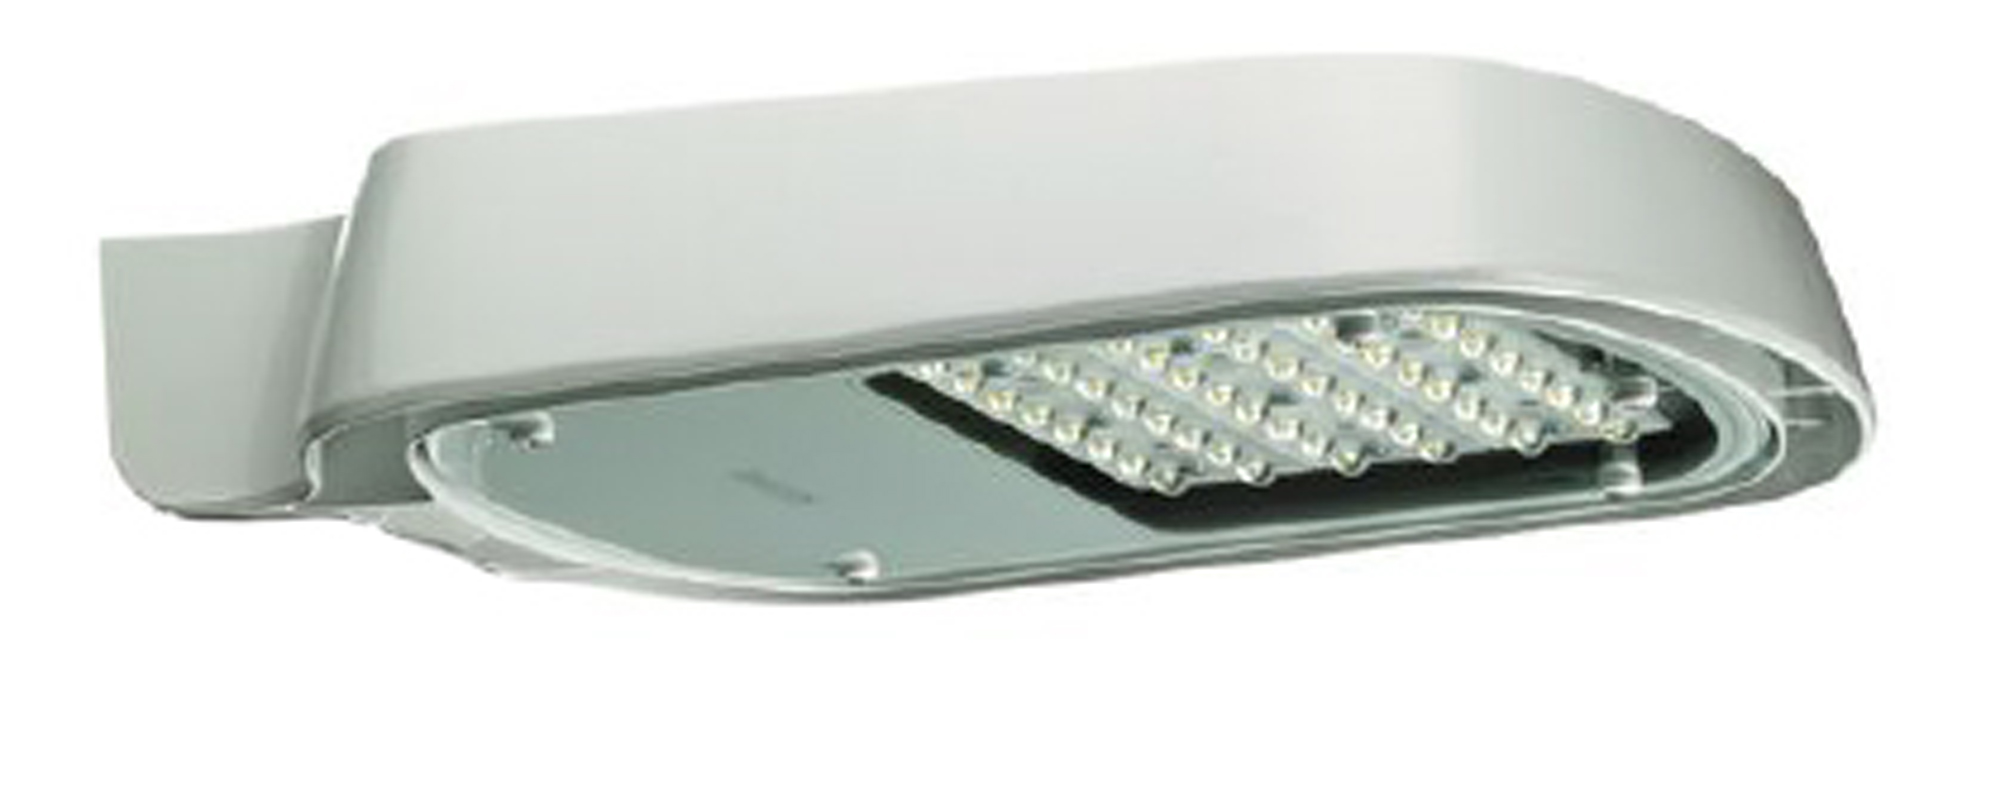 Philips LED Mastleuchte ClearWay BGP307 LED120-4S/740 I DX10 Zopfmass 48/76 TOTAL